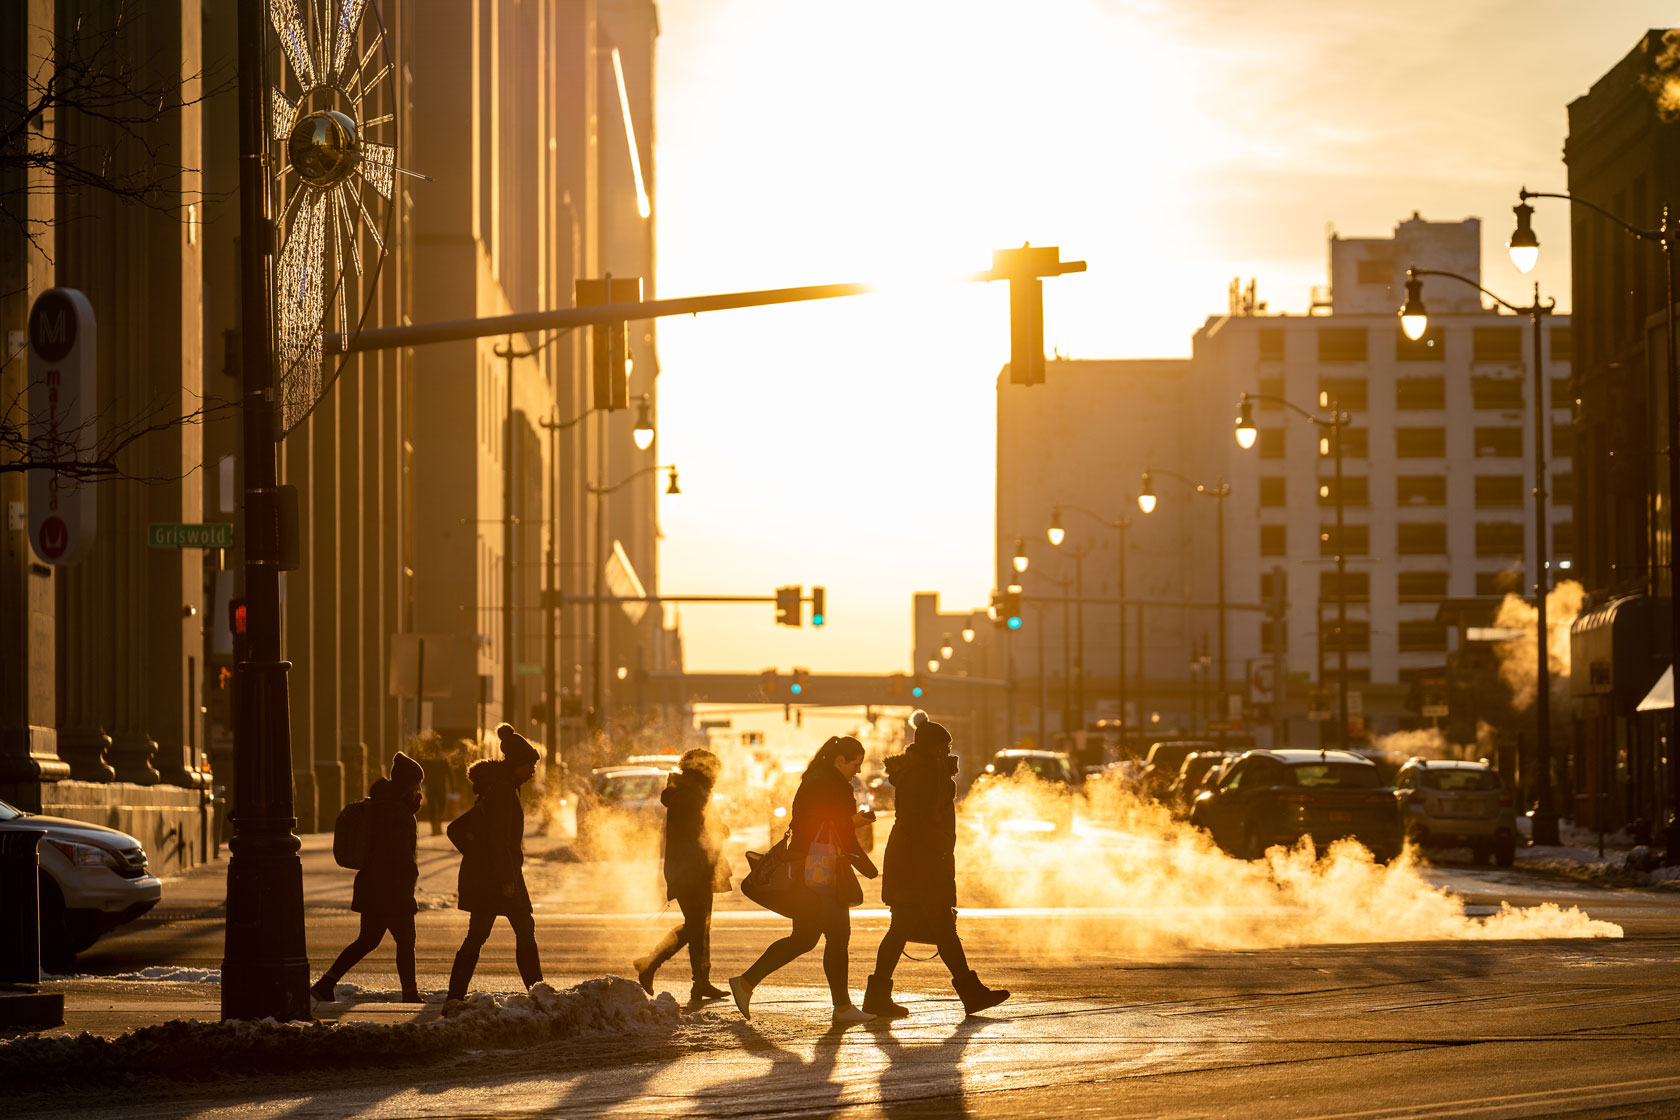 Photo shows people walking across a street as the sun sets in the distance.